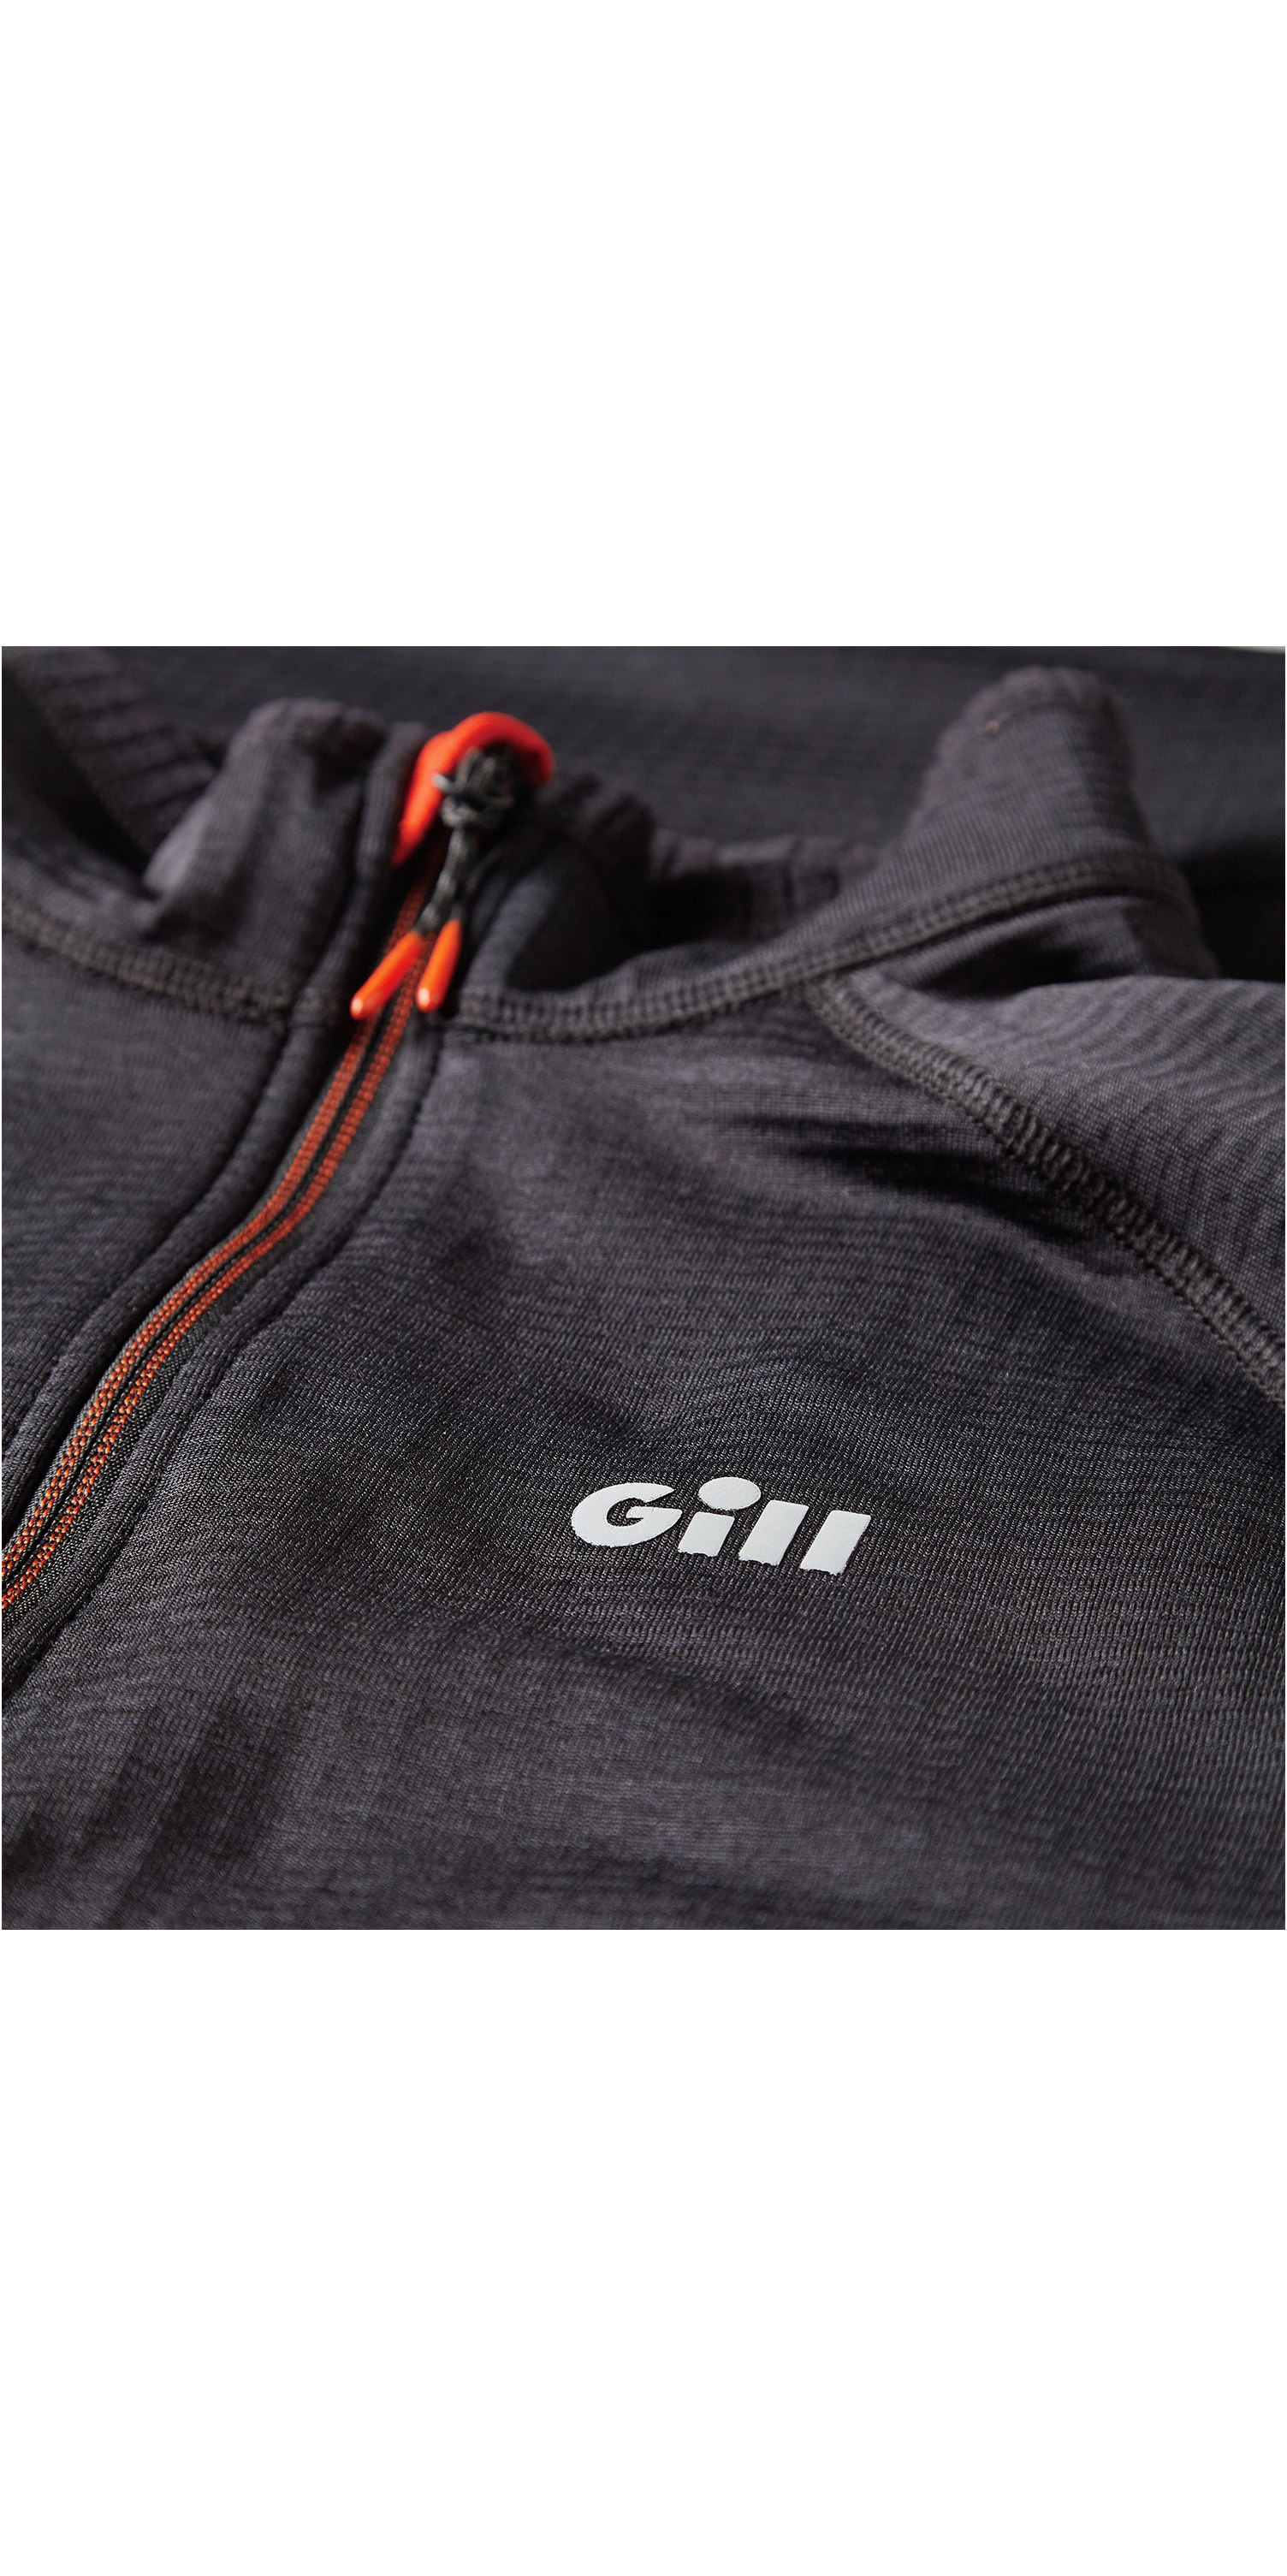 Machine washable Gill Thermogrid Zip Neck Warm Fleece Ash YKK front zip for ventilation Easy Stretch Breathable